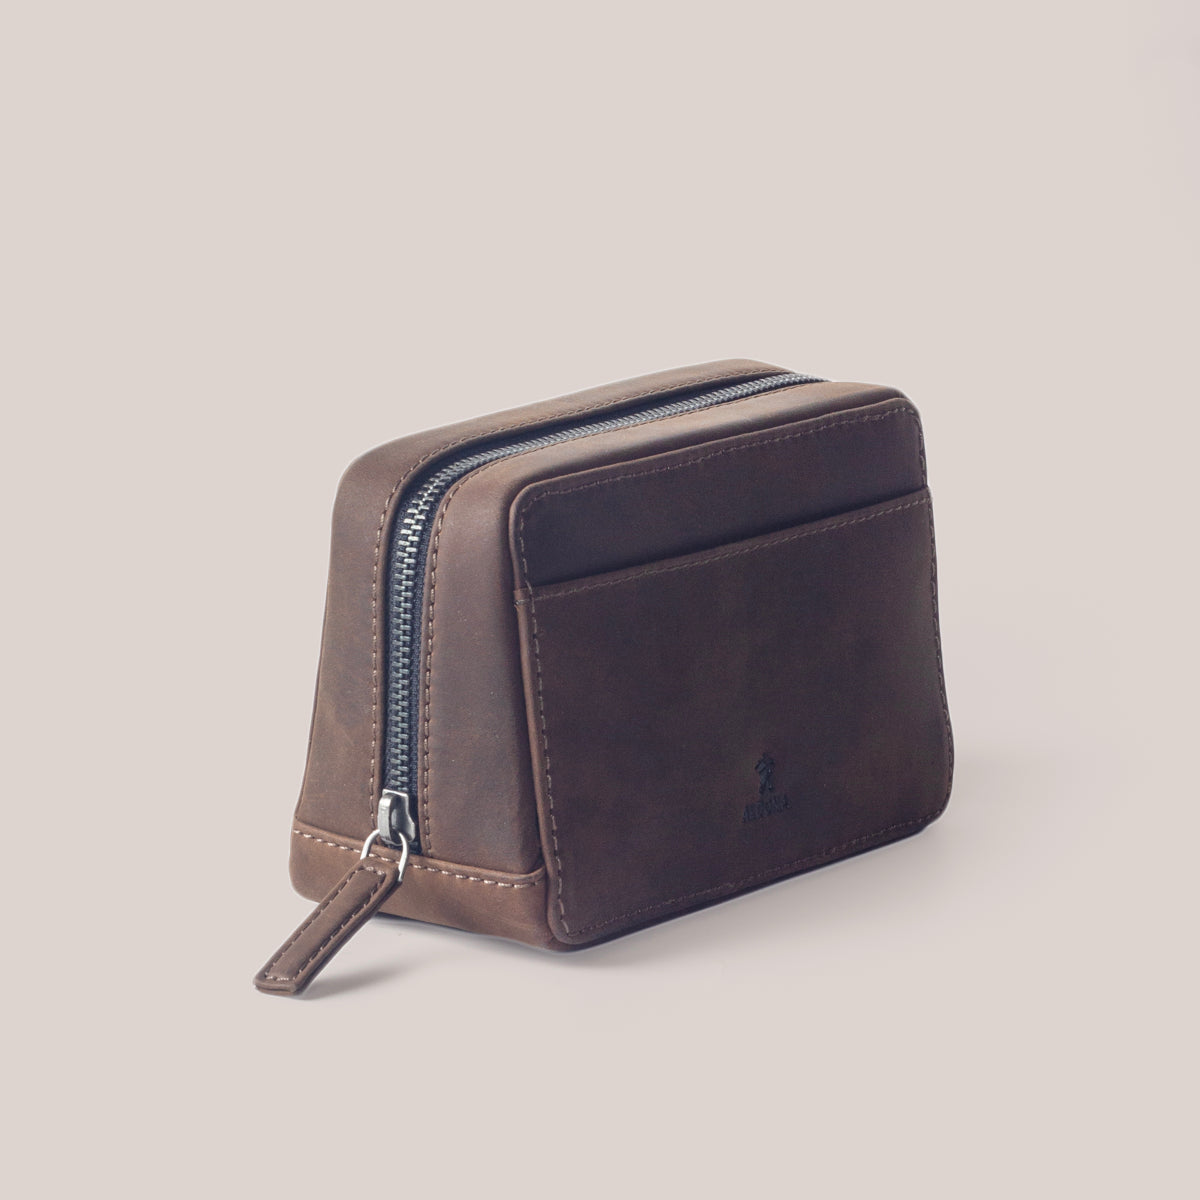 Buy Leather Multi Purpose Brown Pouch